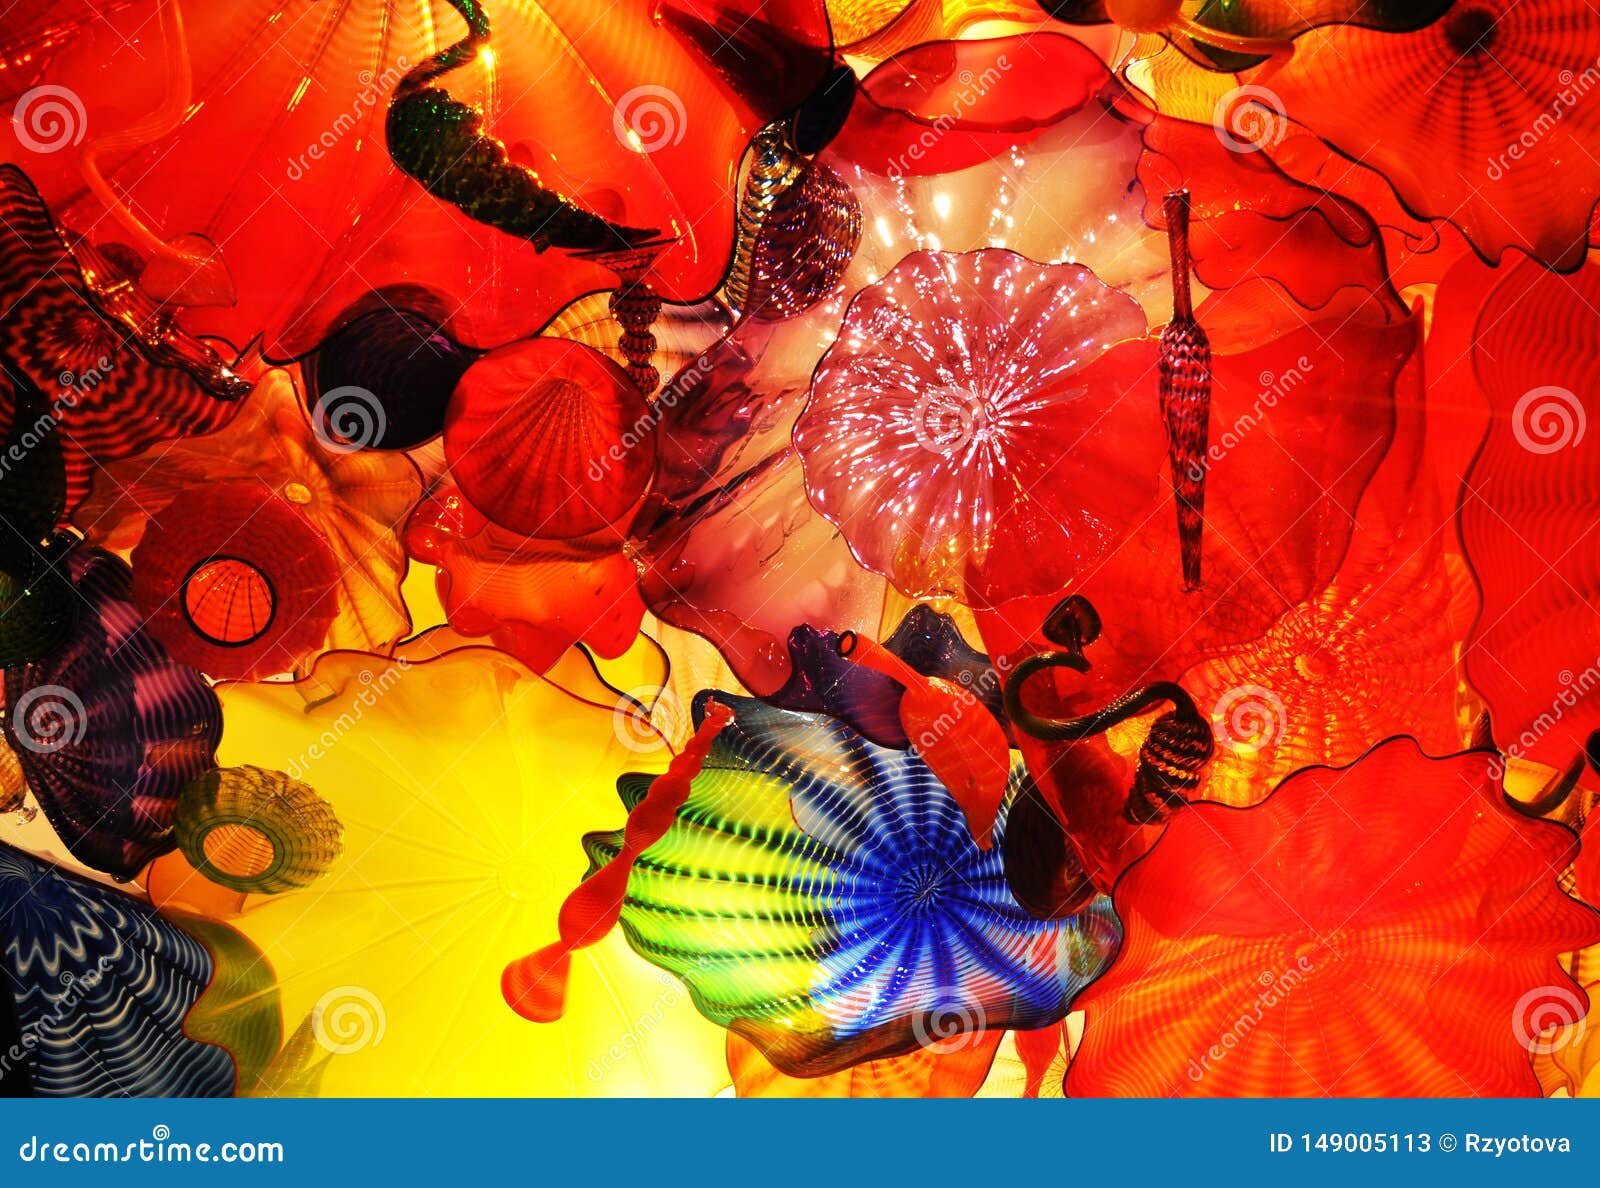 Persian Ceiling Chihuly Garden And Glass Stock Image